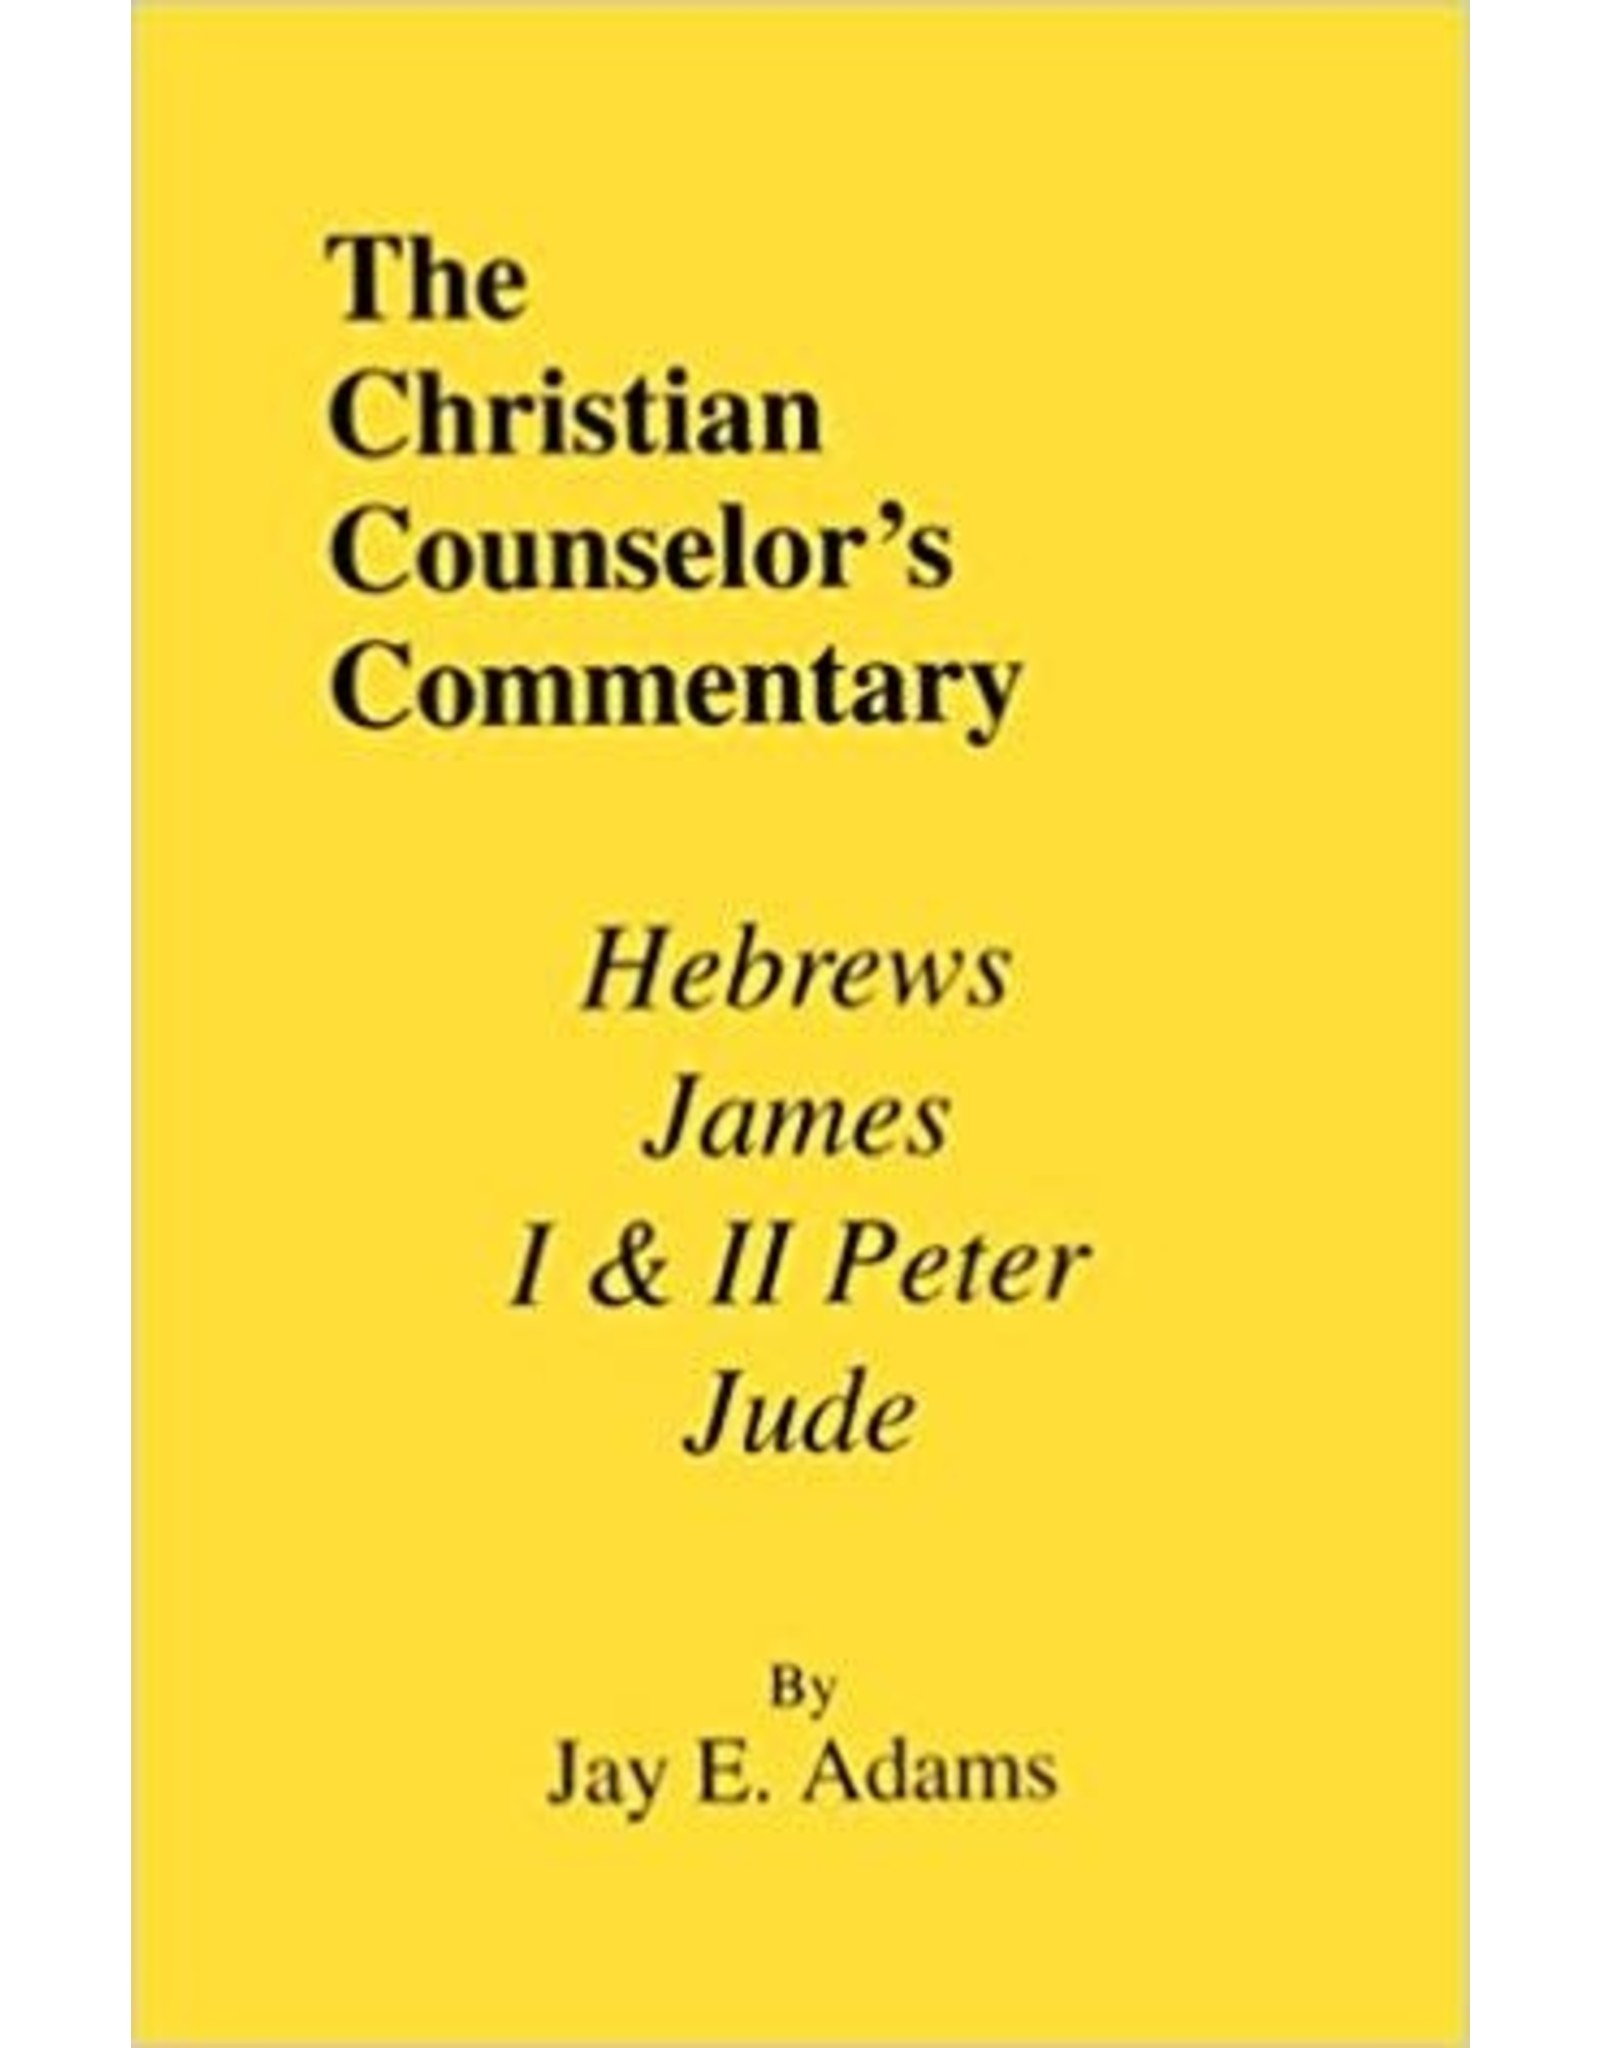 Adams The Christian Counselor's Commentary: Hebrews, James, 1 & 2 Peter, Jude